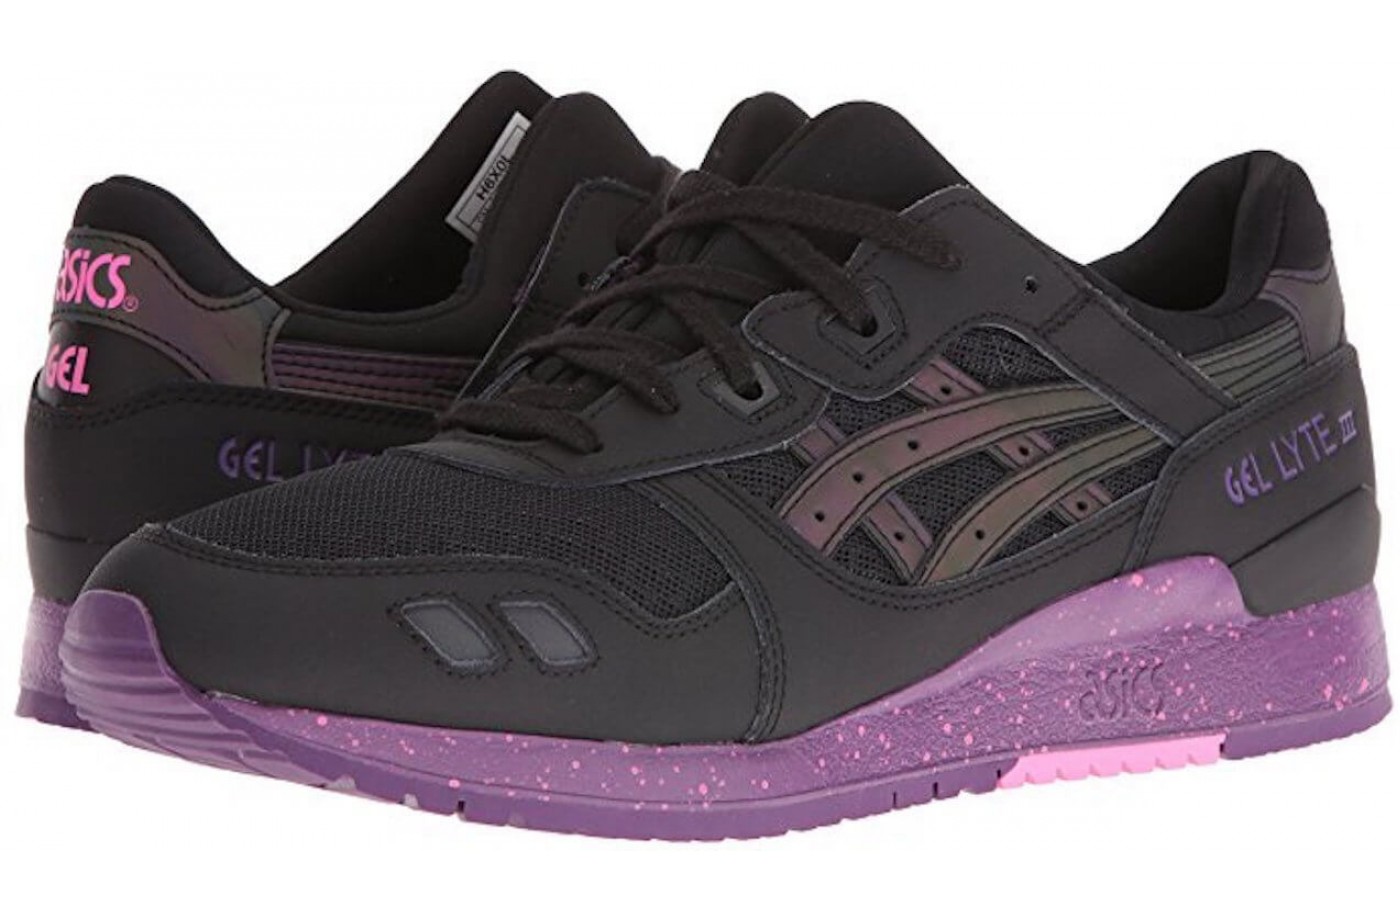 The Asics Gel Lyte III is available in an array of styles